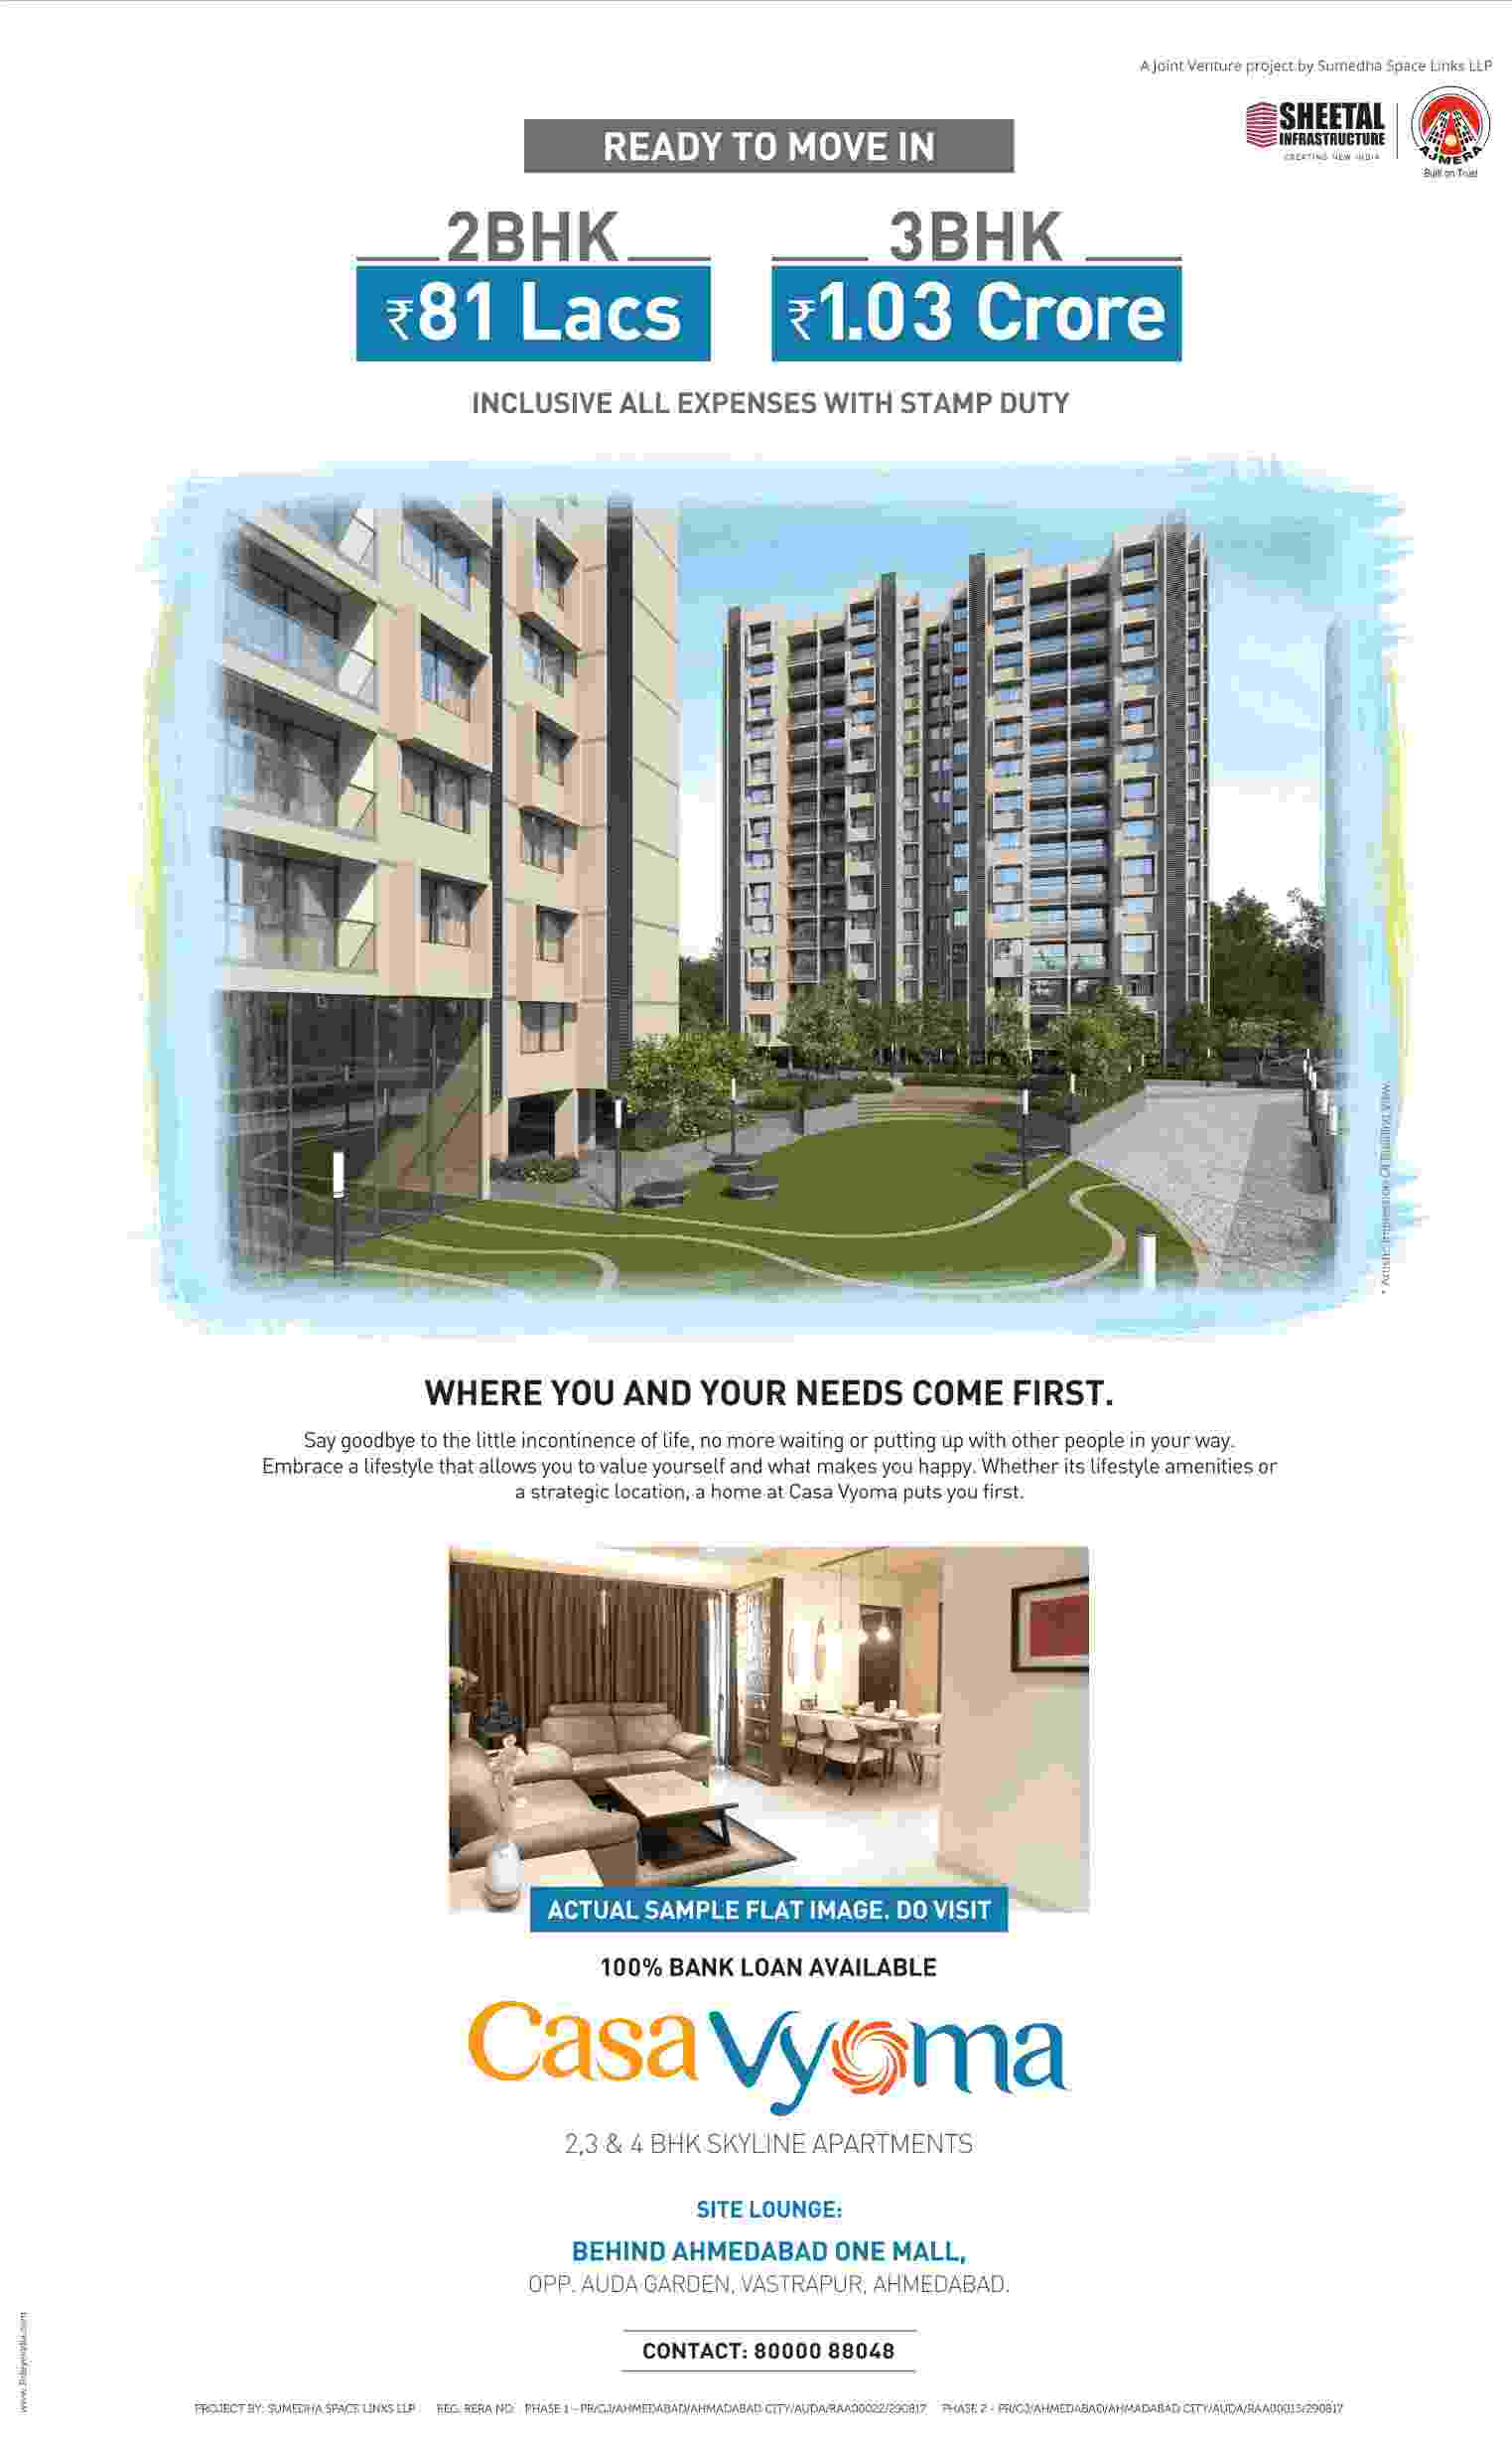 Live in ready to move in homes at Sheetal Casa Vyoma in Ahmedabad